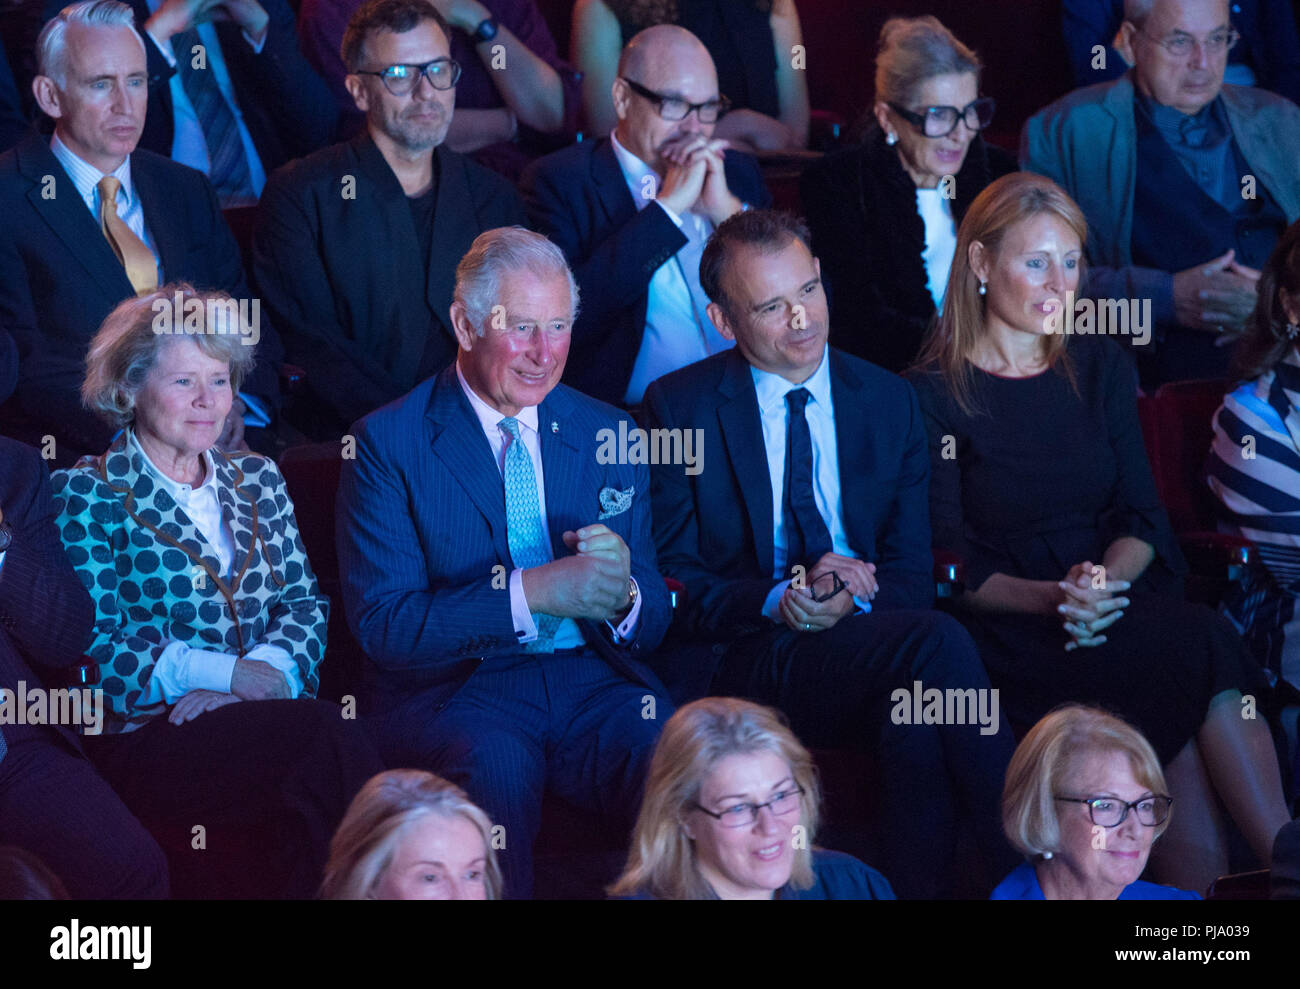 The Prince of Wales watches a performance alongside (left to right) actress Imelda Staunton, Old Vic Artistic Director Matthew Warchus and Old Vic Executive Director Kate Varah at the Old Vic Theatre, in central London, during a visit to mark the theatre's 200th anniversary. Stock Photo